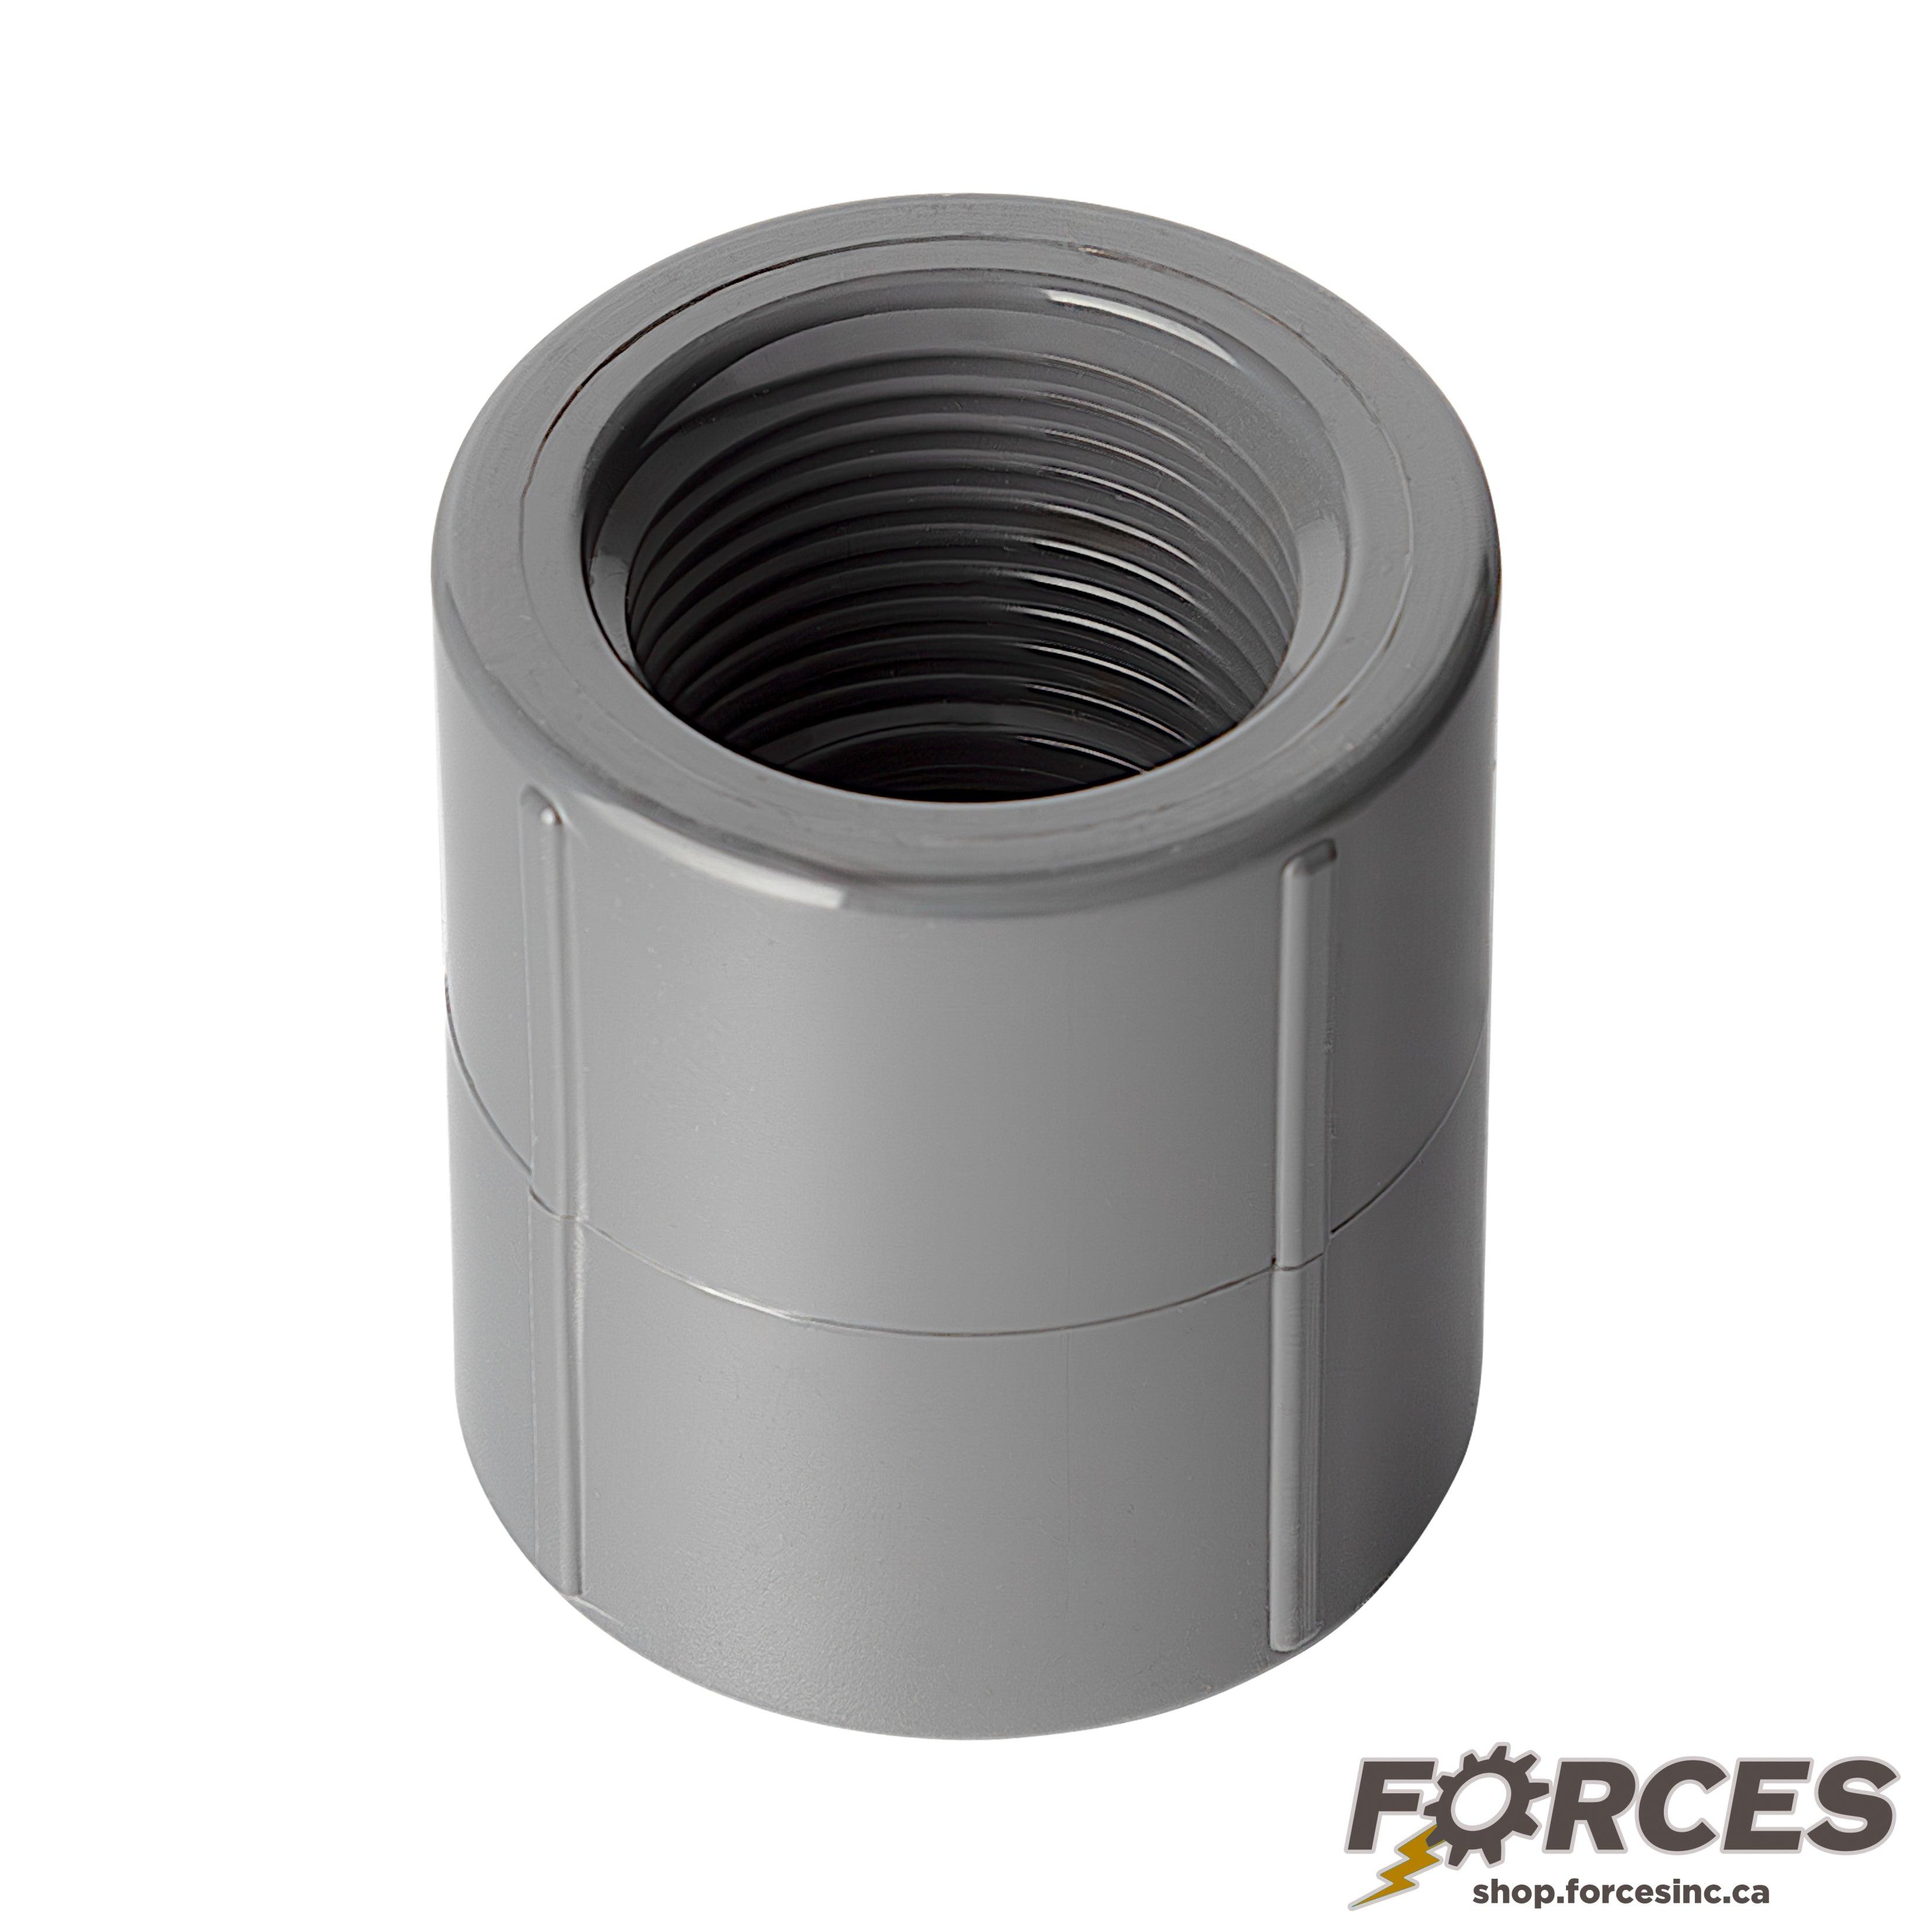 1/2" Coupling (Threaded) Sch 80 - PVC Grey | 830005 - Forces Inc